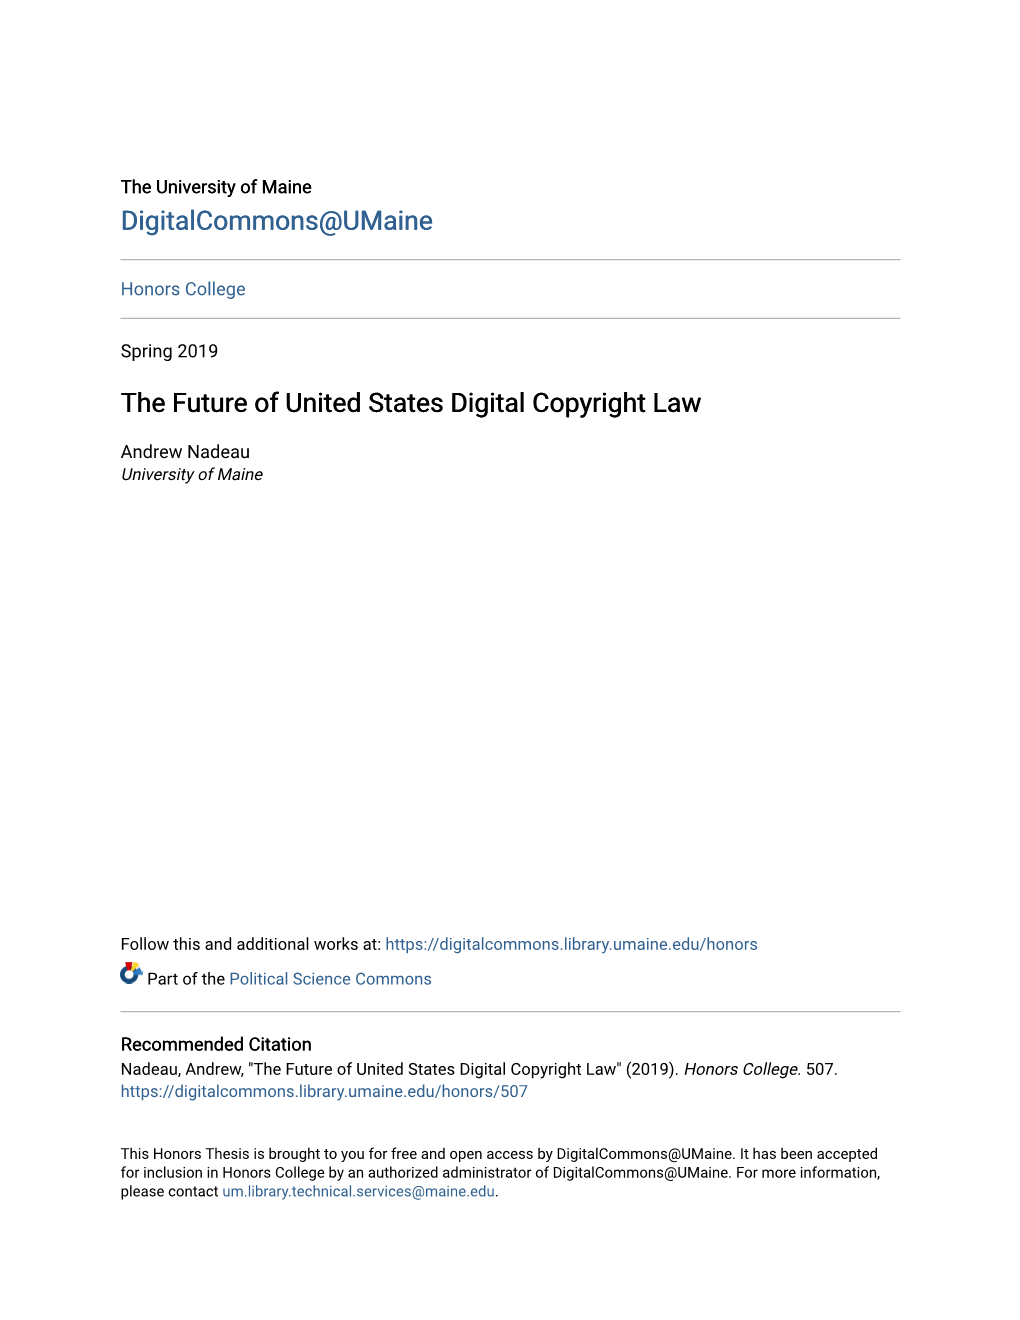 The Future of United States Digital Copyright Law